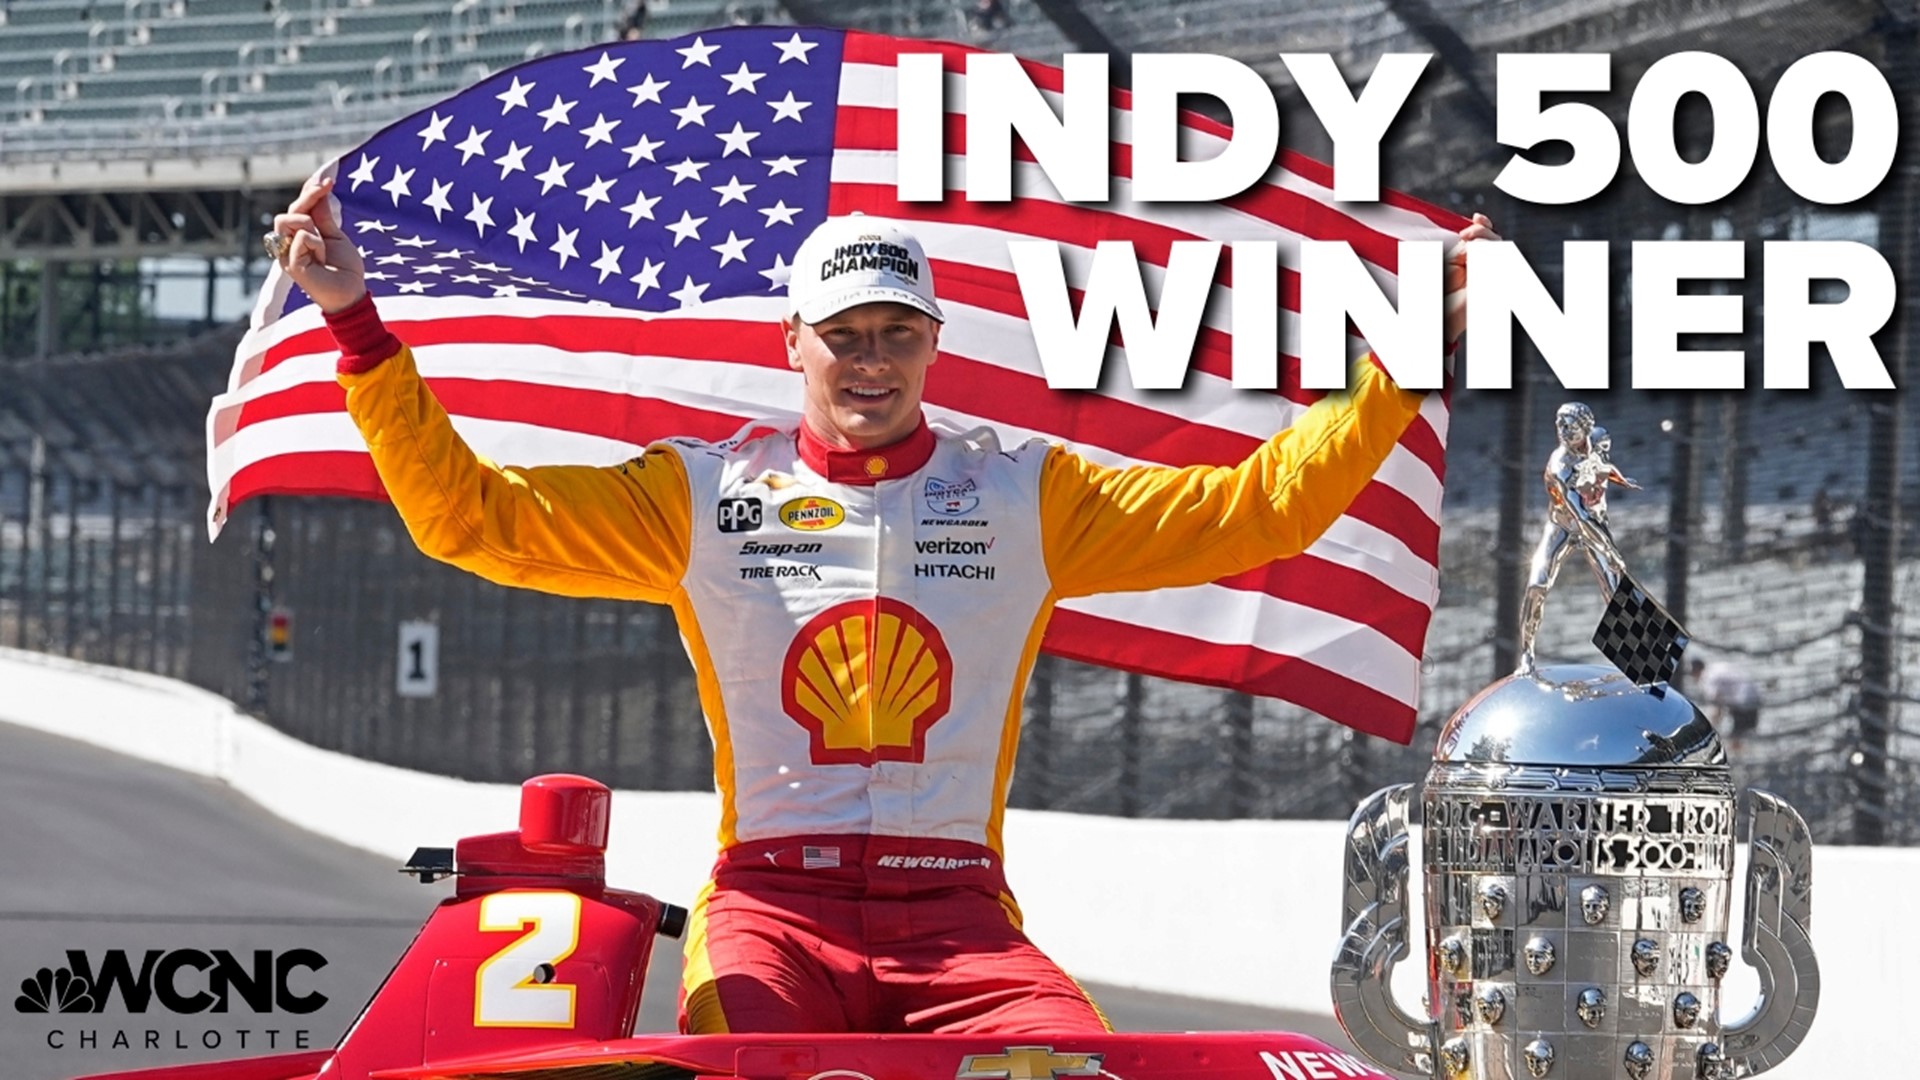 Josef Newgarden spoke with WCNC Charlotte about his last-lap pass to win the Indy 500 and the emotions of securing the victory.